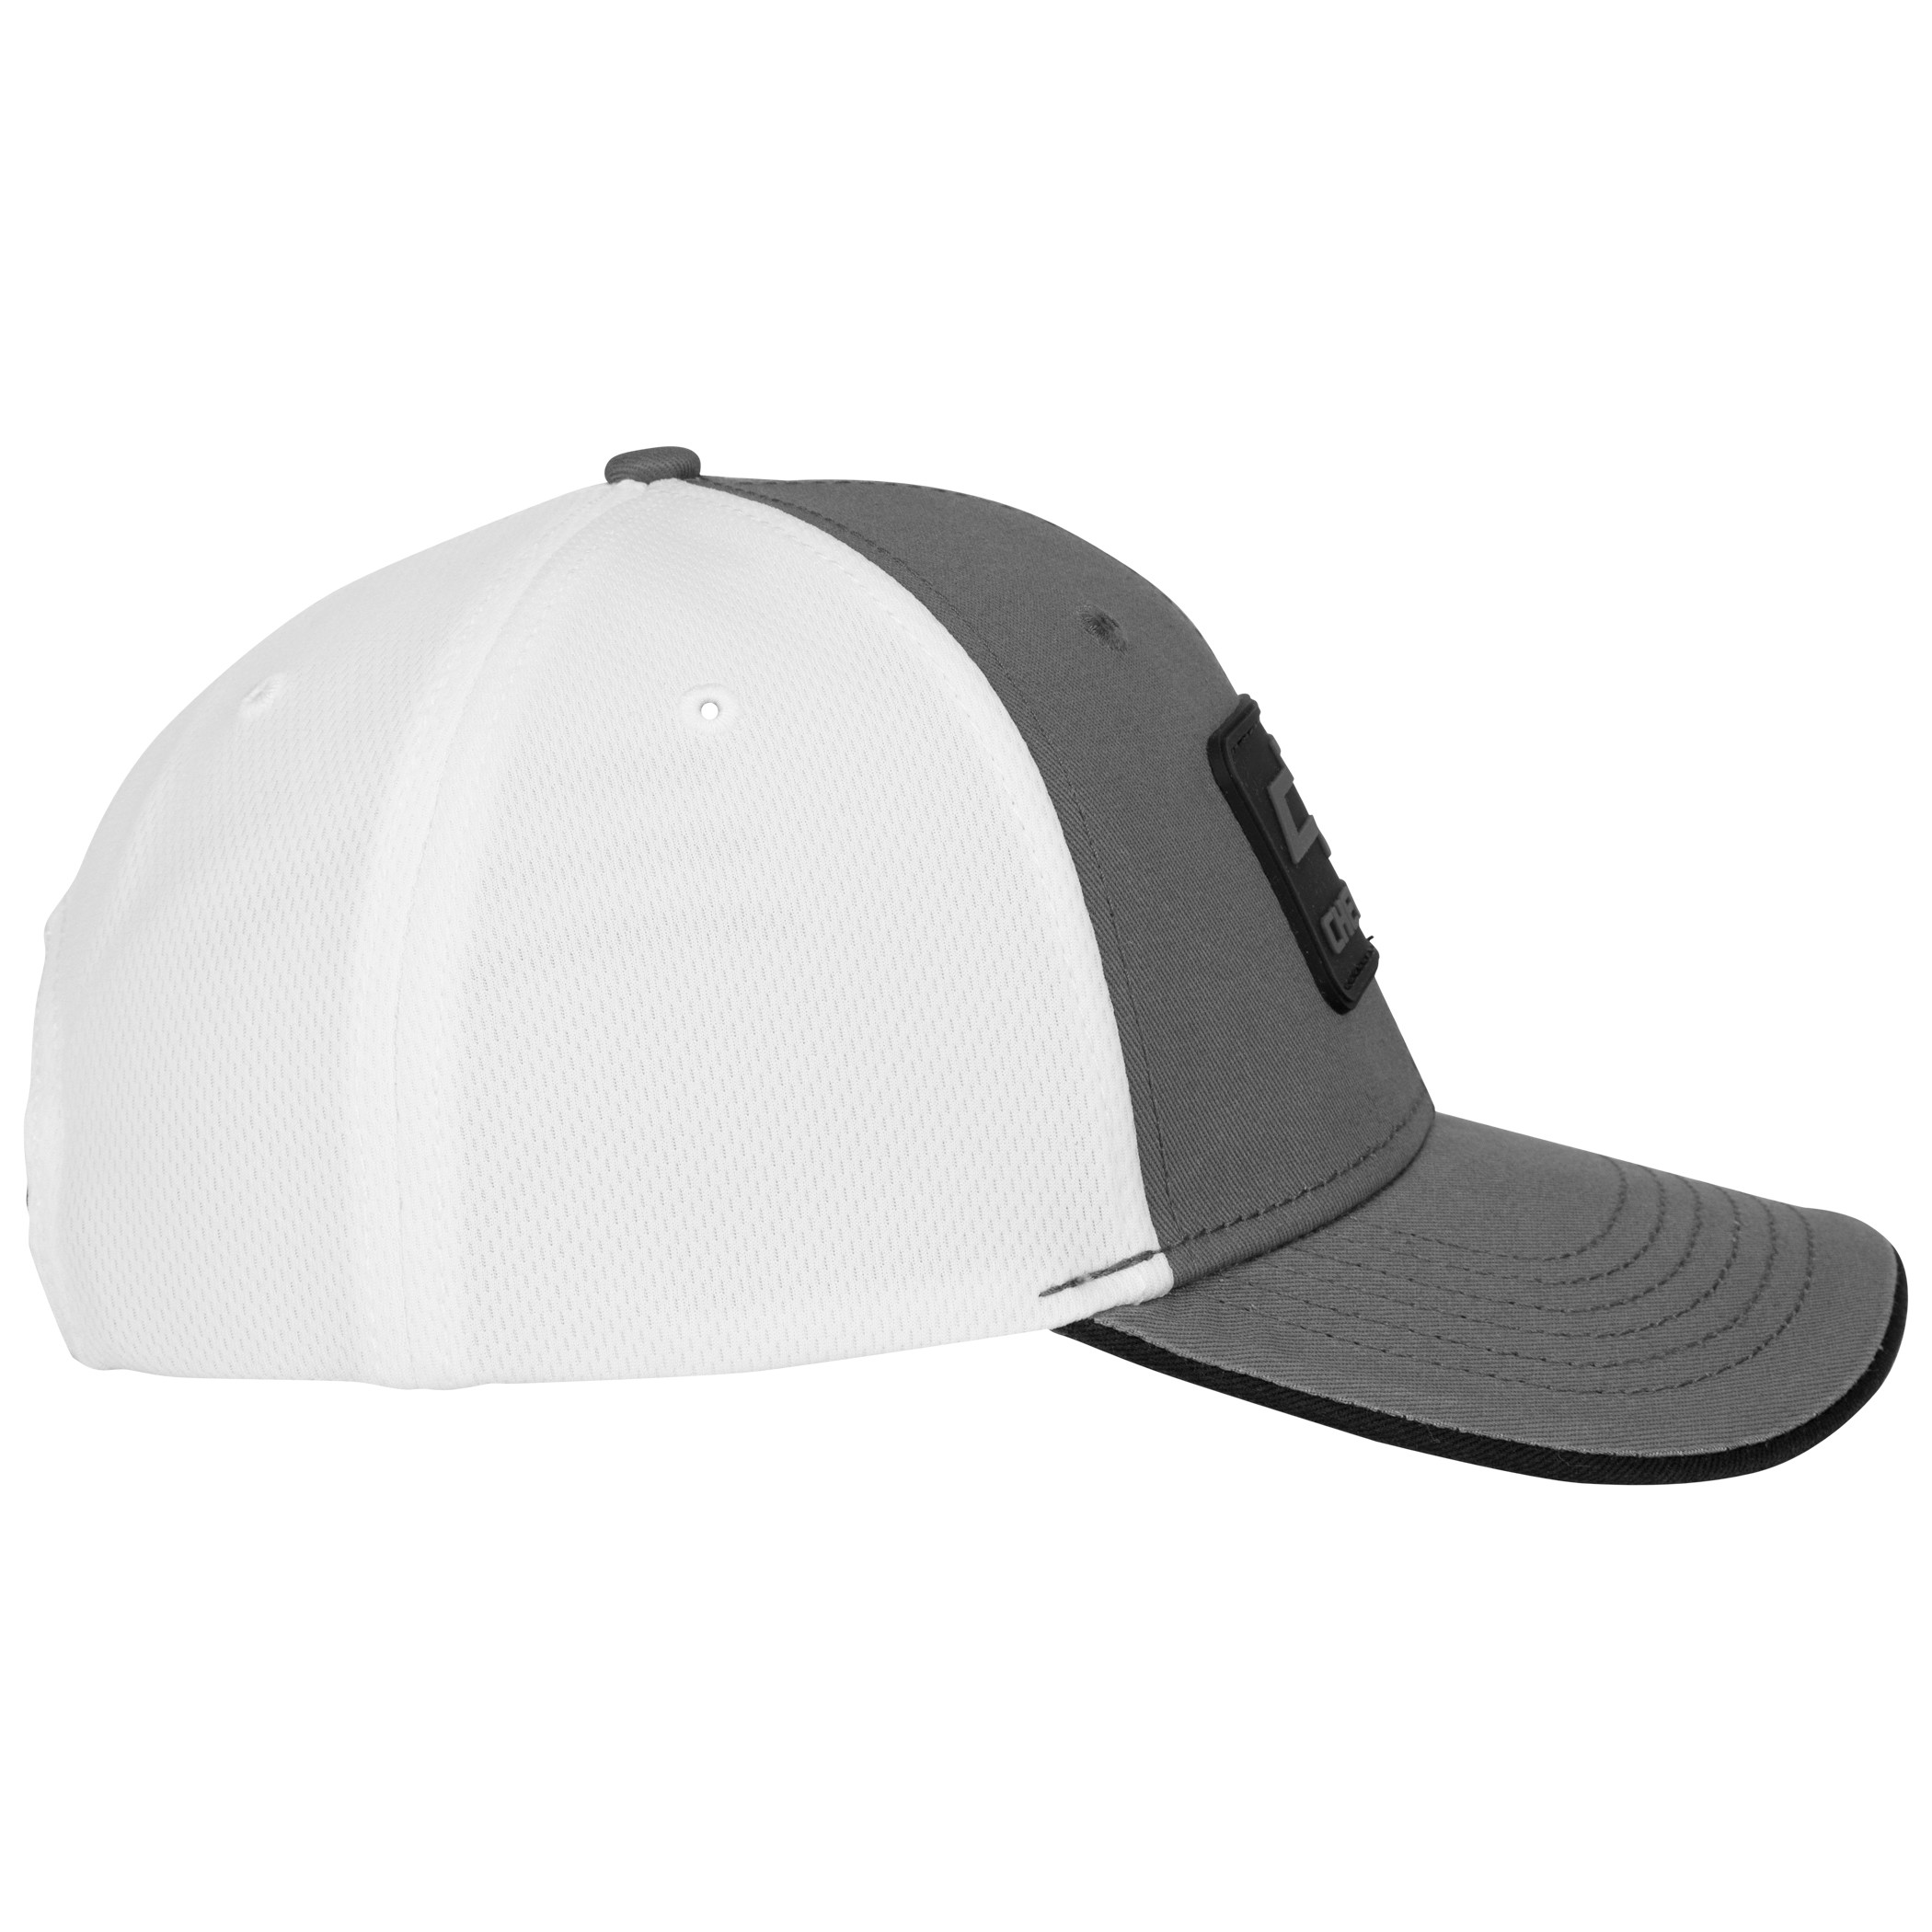 Chevy Chevrolet Rubber Patch Logo Grey Colorway Mesh Back Hat